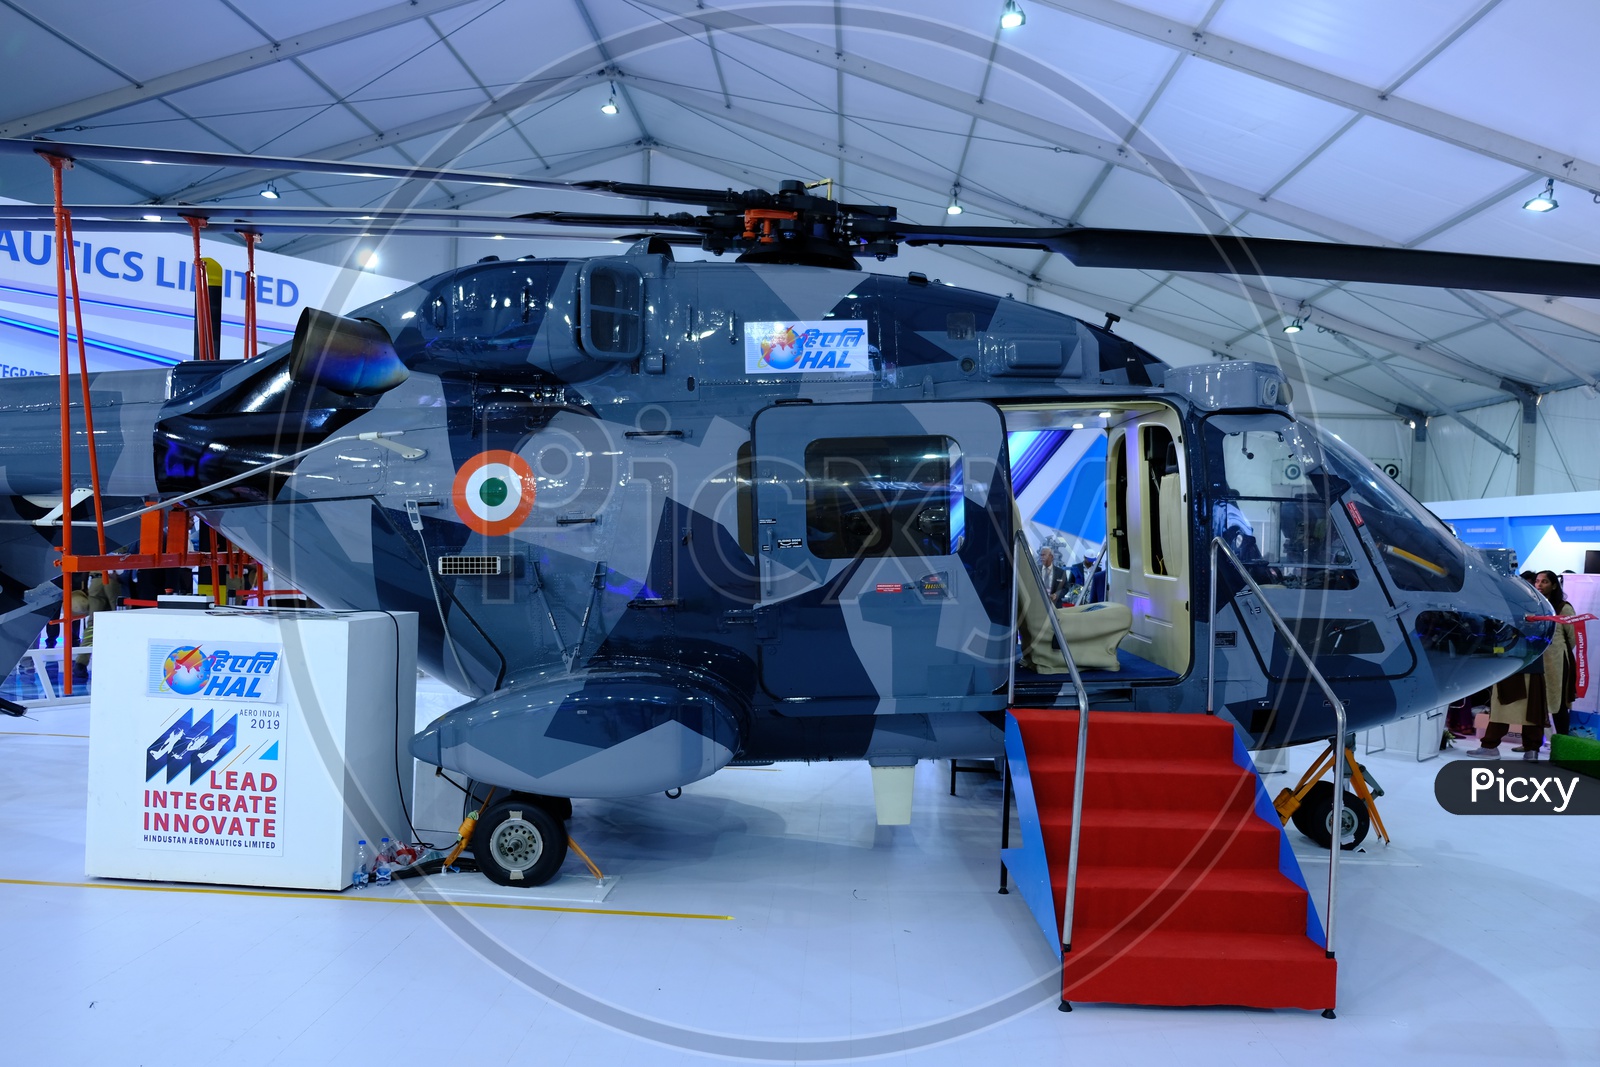 HAL Advanced Light Helicopter for Ship Borne Operations displayed at Bangalore Aero India 2019